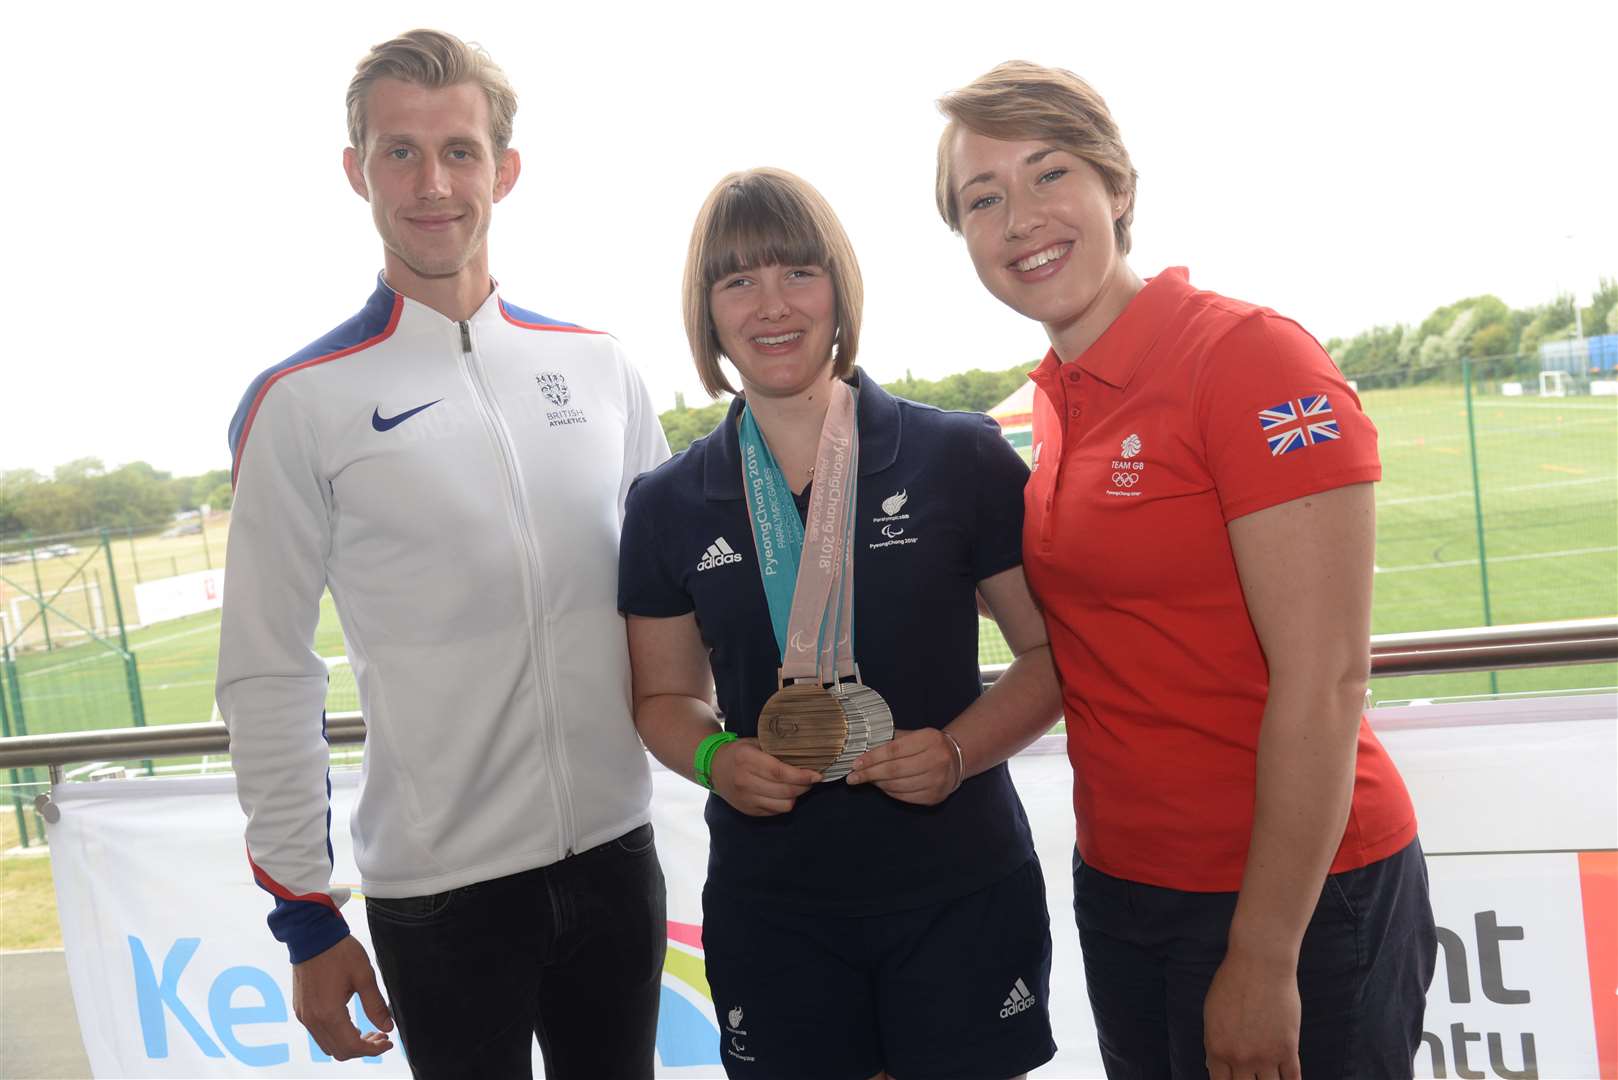 Kent Olympian's Jack Green, Millie Knight and Lizzy Yarnold Picture: Chris Davey